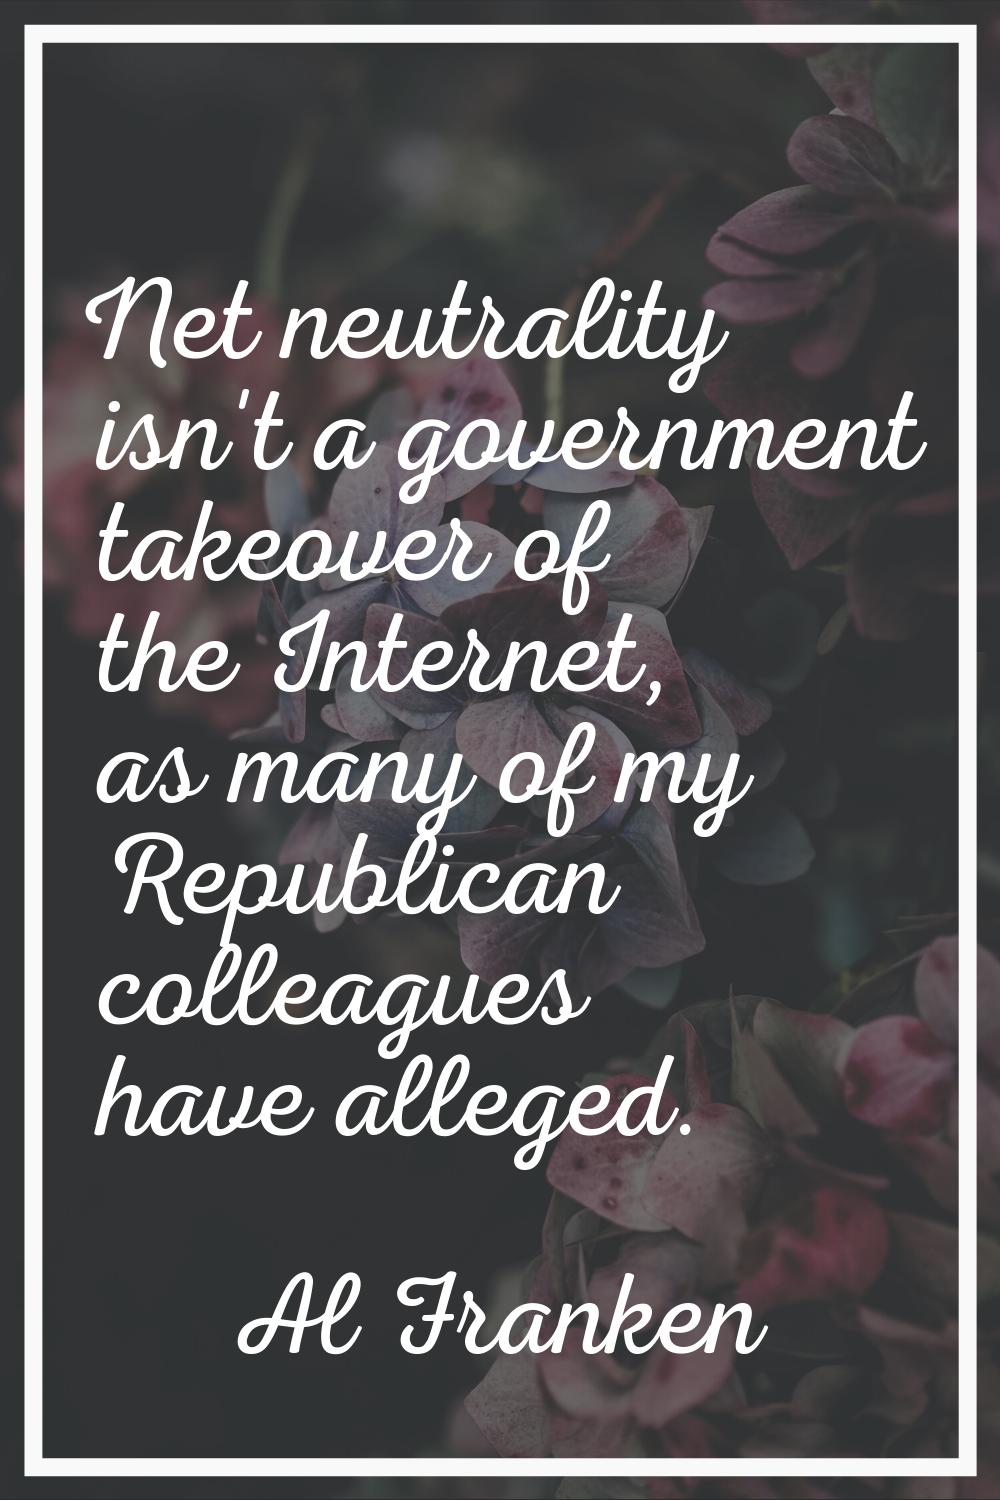 Net neutrality isn't a government takeover of the Internet, as many of my Republican colleagues hav